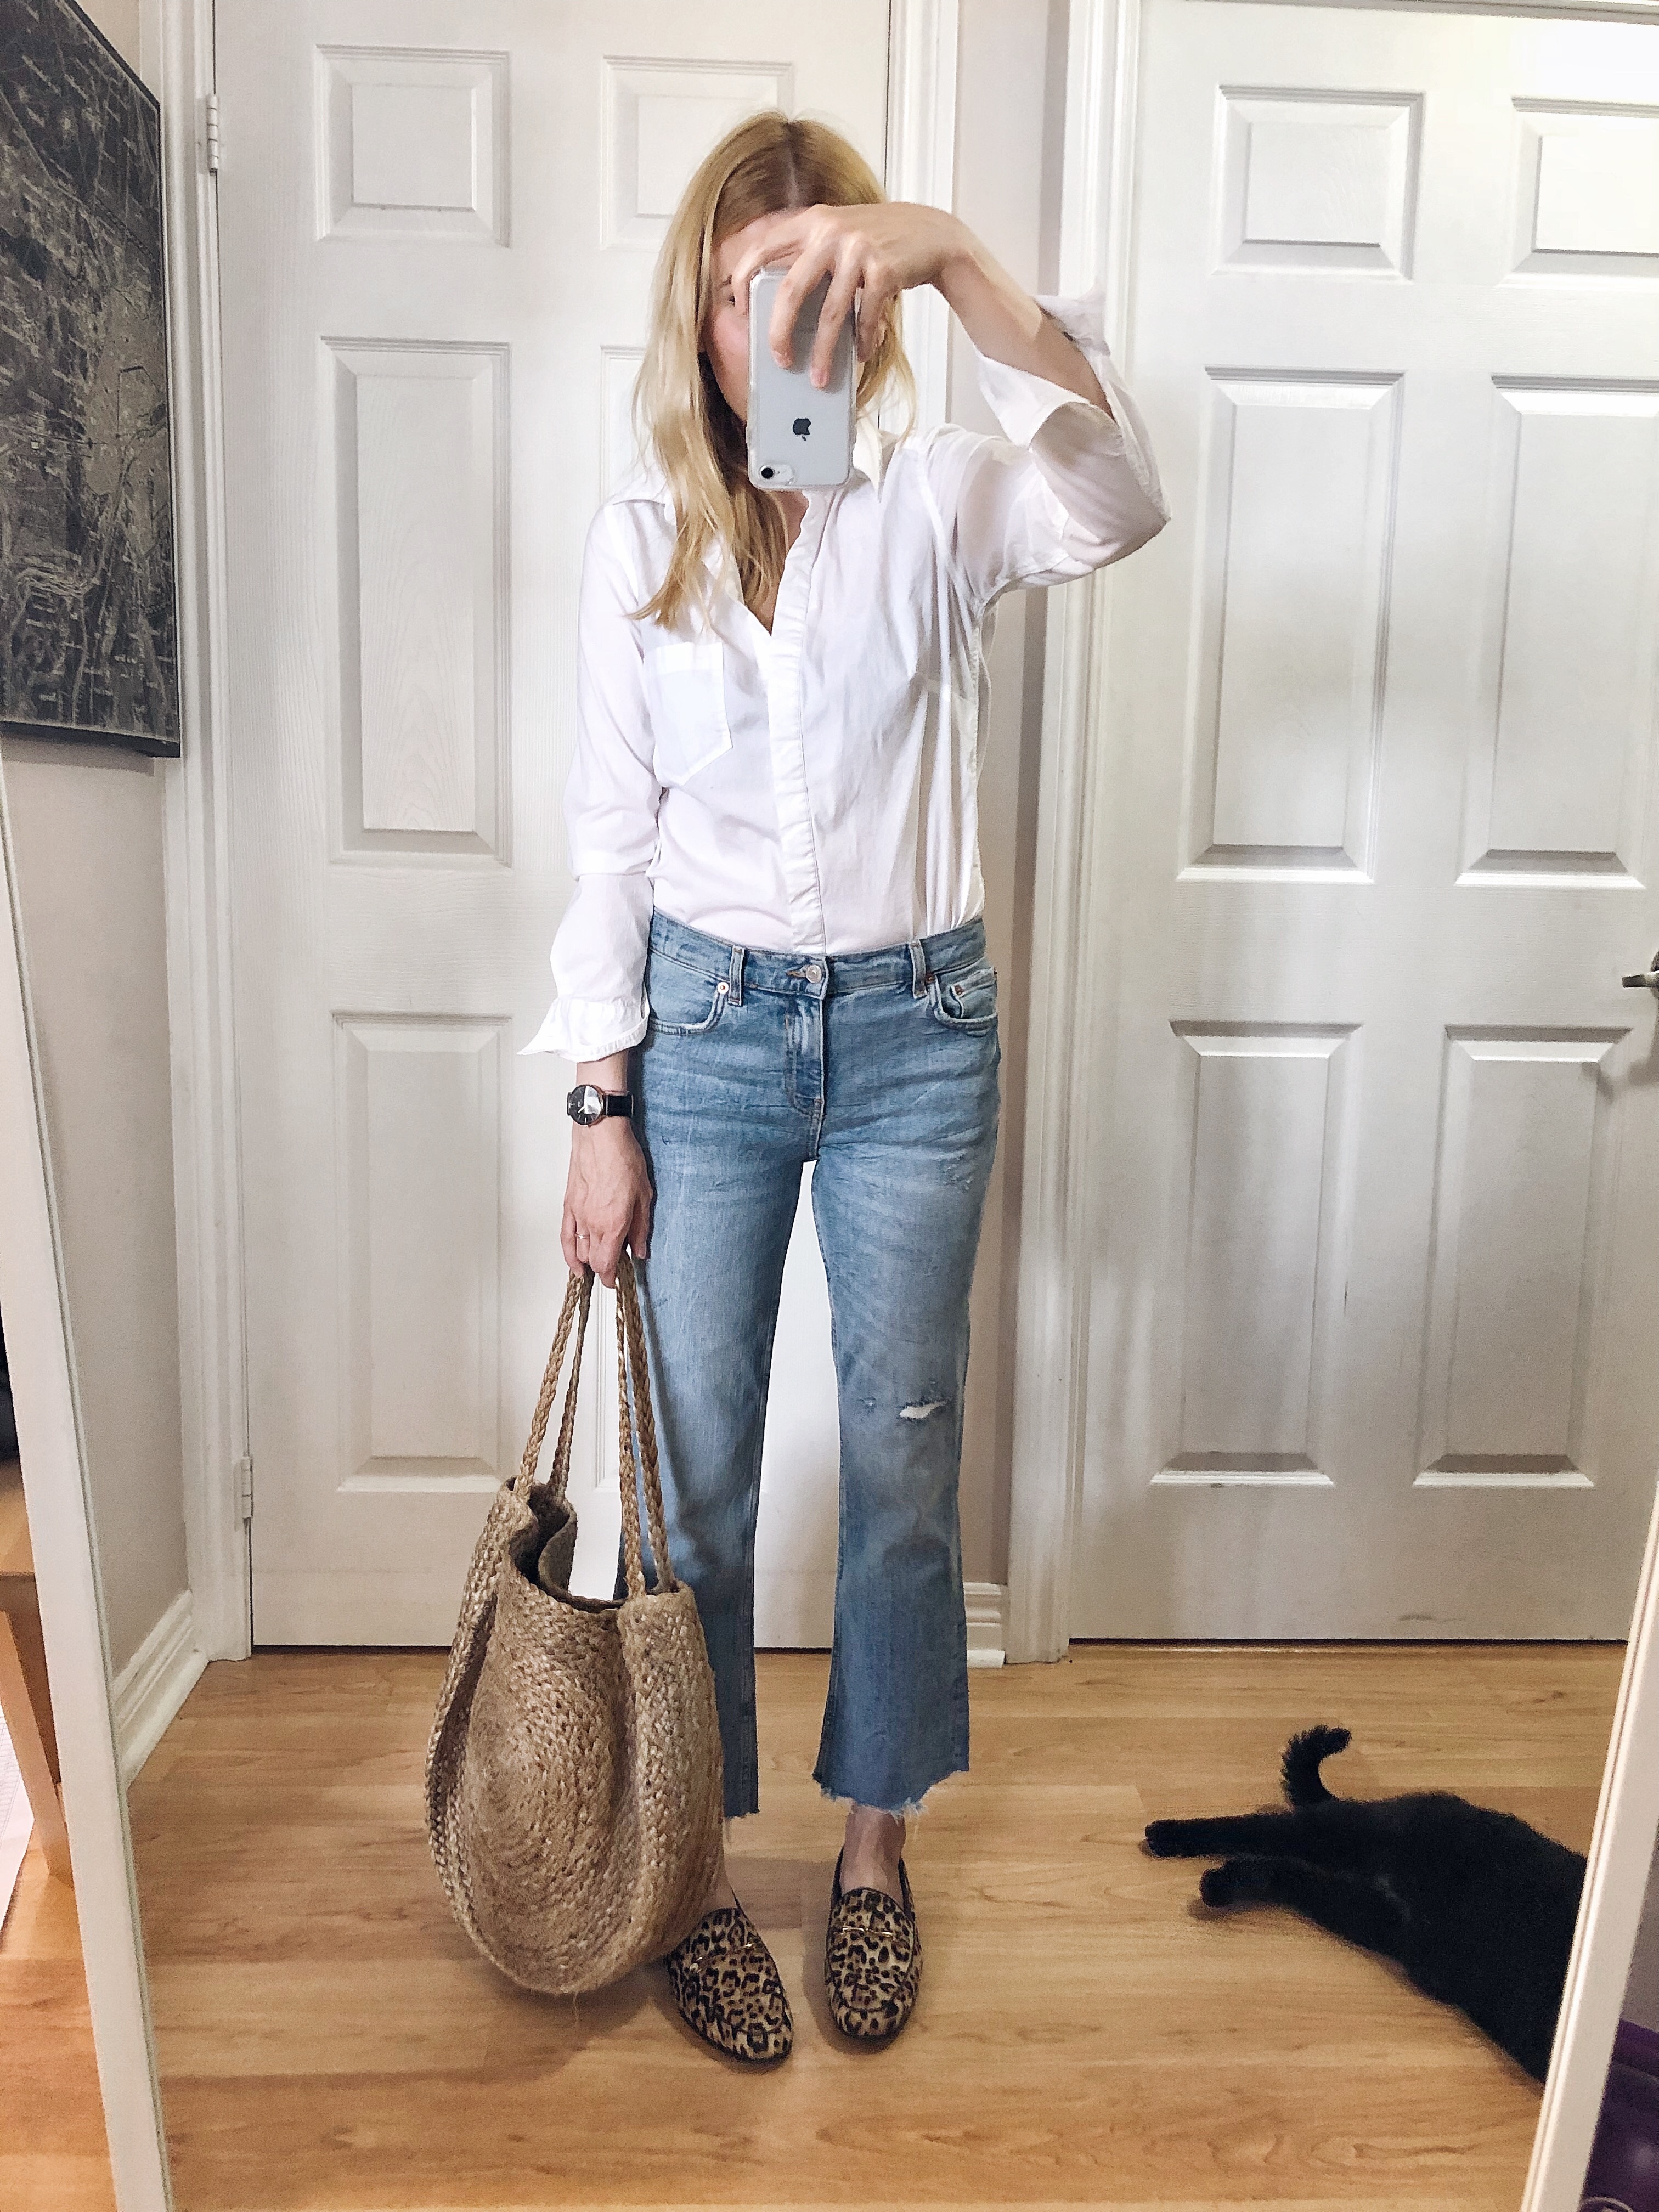 I am wearing a white blouse, cropped jeans, animal print loafers, and a large woven tote.